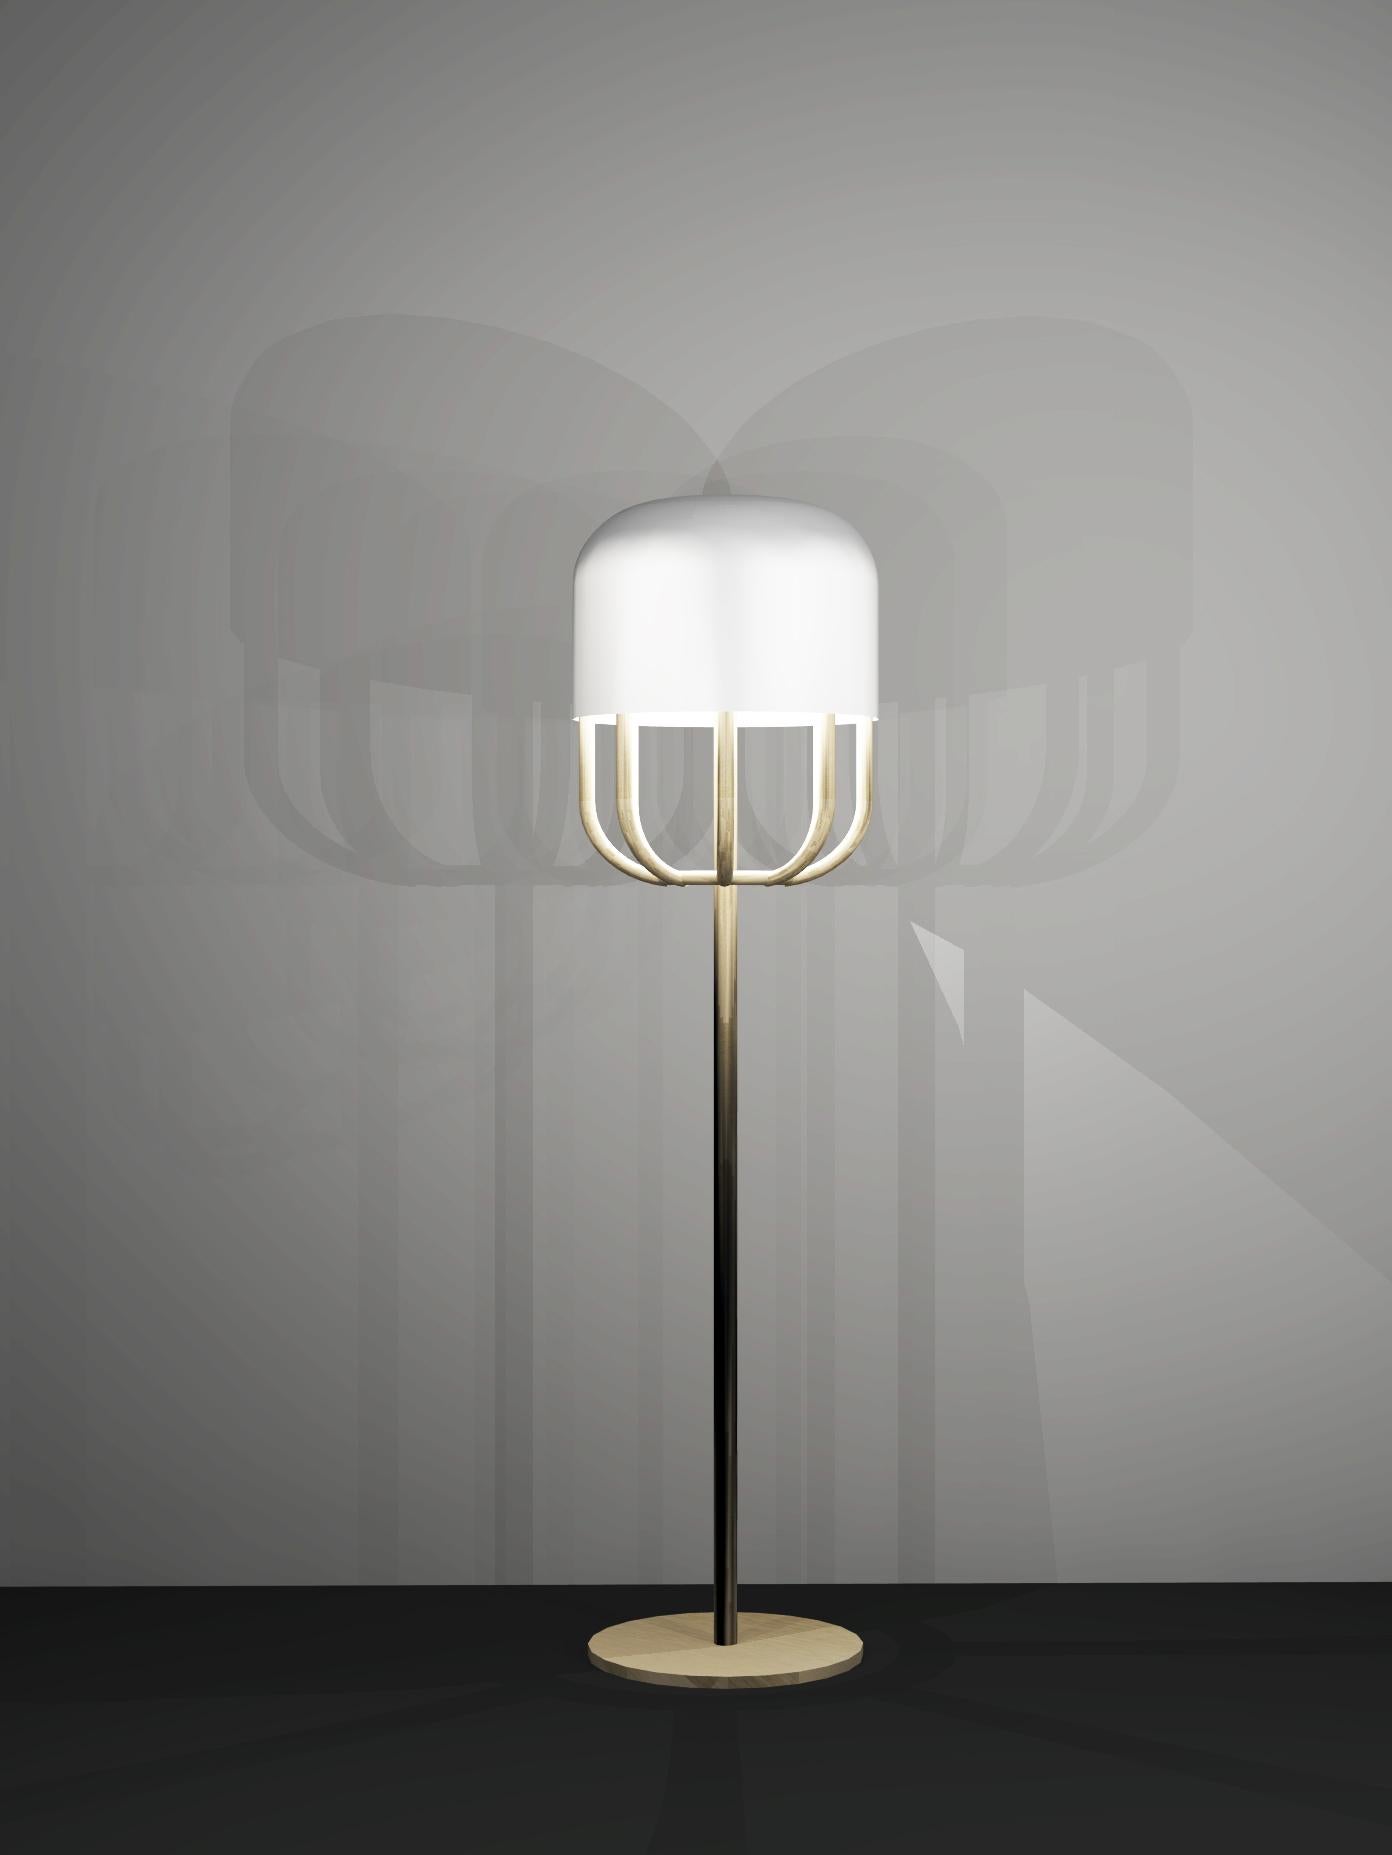 This floor lamp has a bold design that uses symmetry between the outer casing and the frame of a capsule shape. The soft glow of opal glass is elegantly supported and highlighted by a beautiful brushed brass structure.
Metalwork can be powder-coated